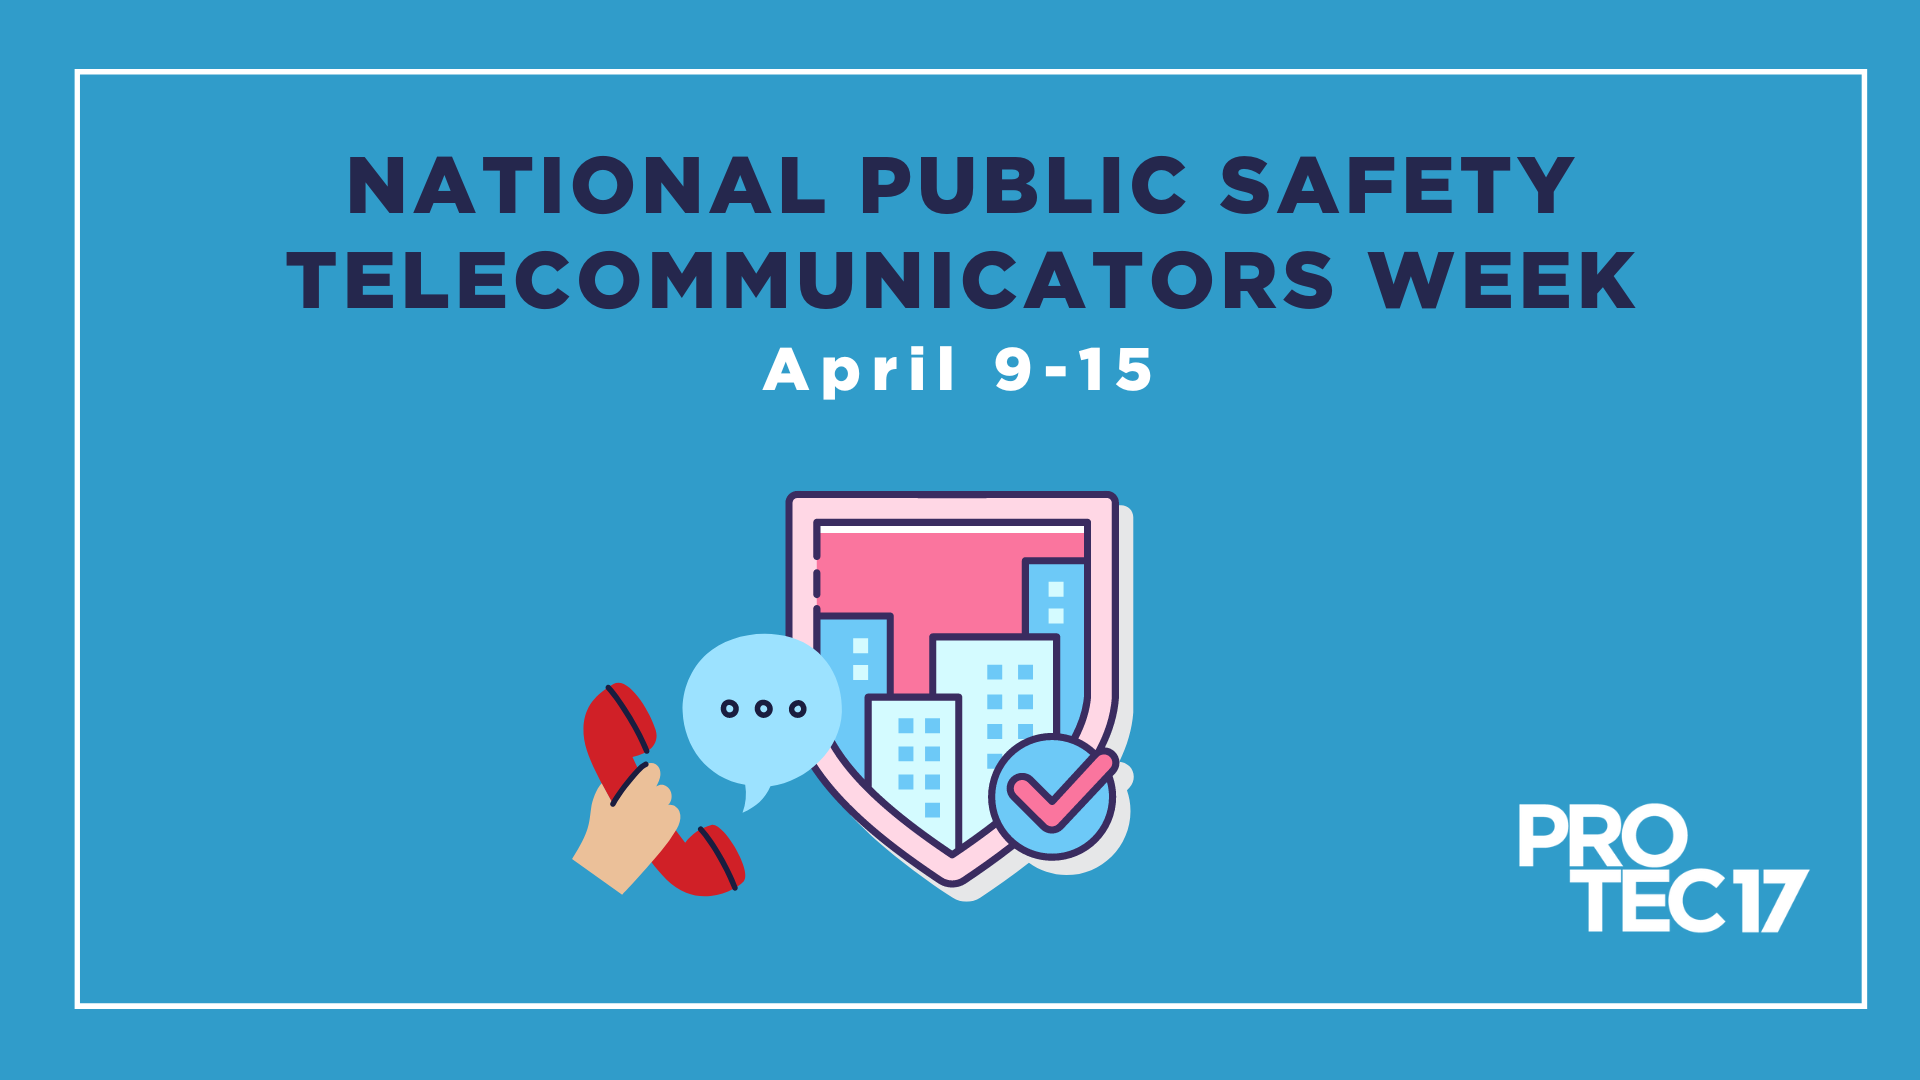 Image that reads, "NATIONAL PUBLIC SAFETY TELECOMMUNICATORS WEEK | April 9-15" There are colorful illustrations of a hand answering a phone call and the city with a check mark. The PROTEC17 logo is in the bottom right.